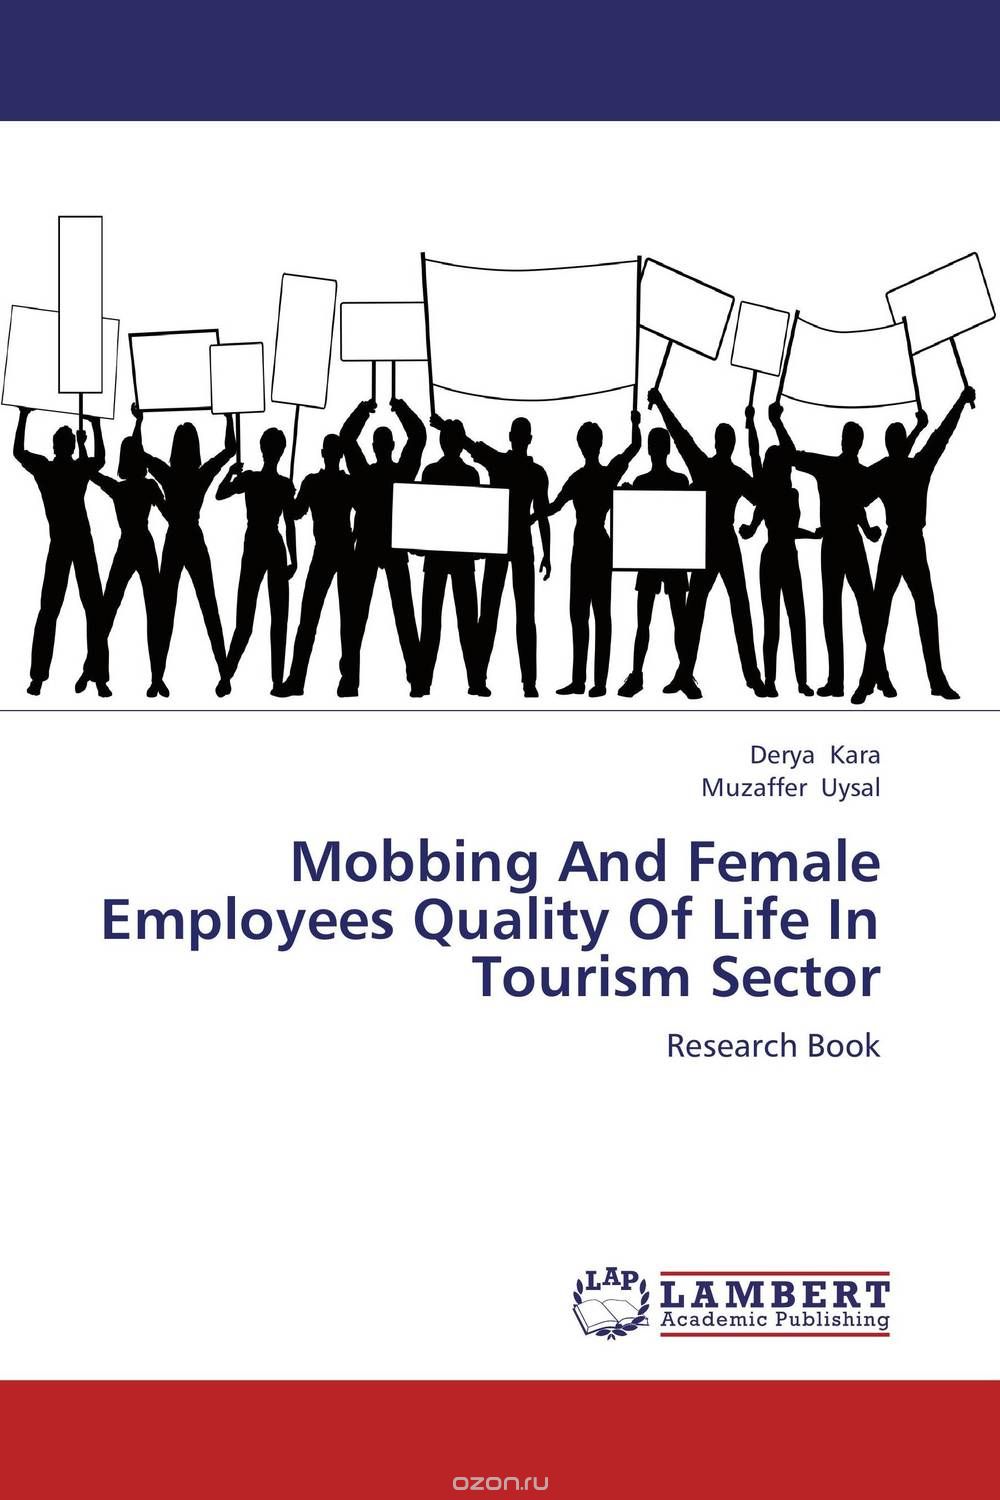 Скачать книгу "Mobbing And Female Employees Quality Of Life In Tourism Sector"